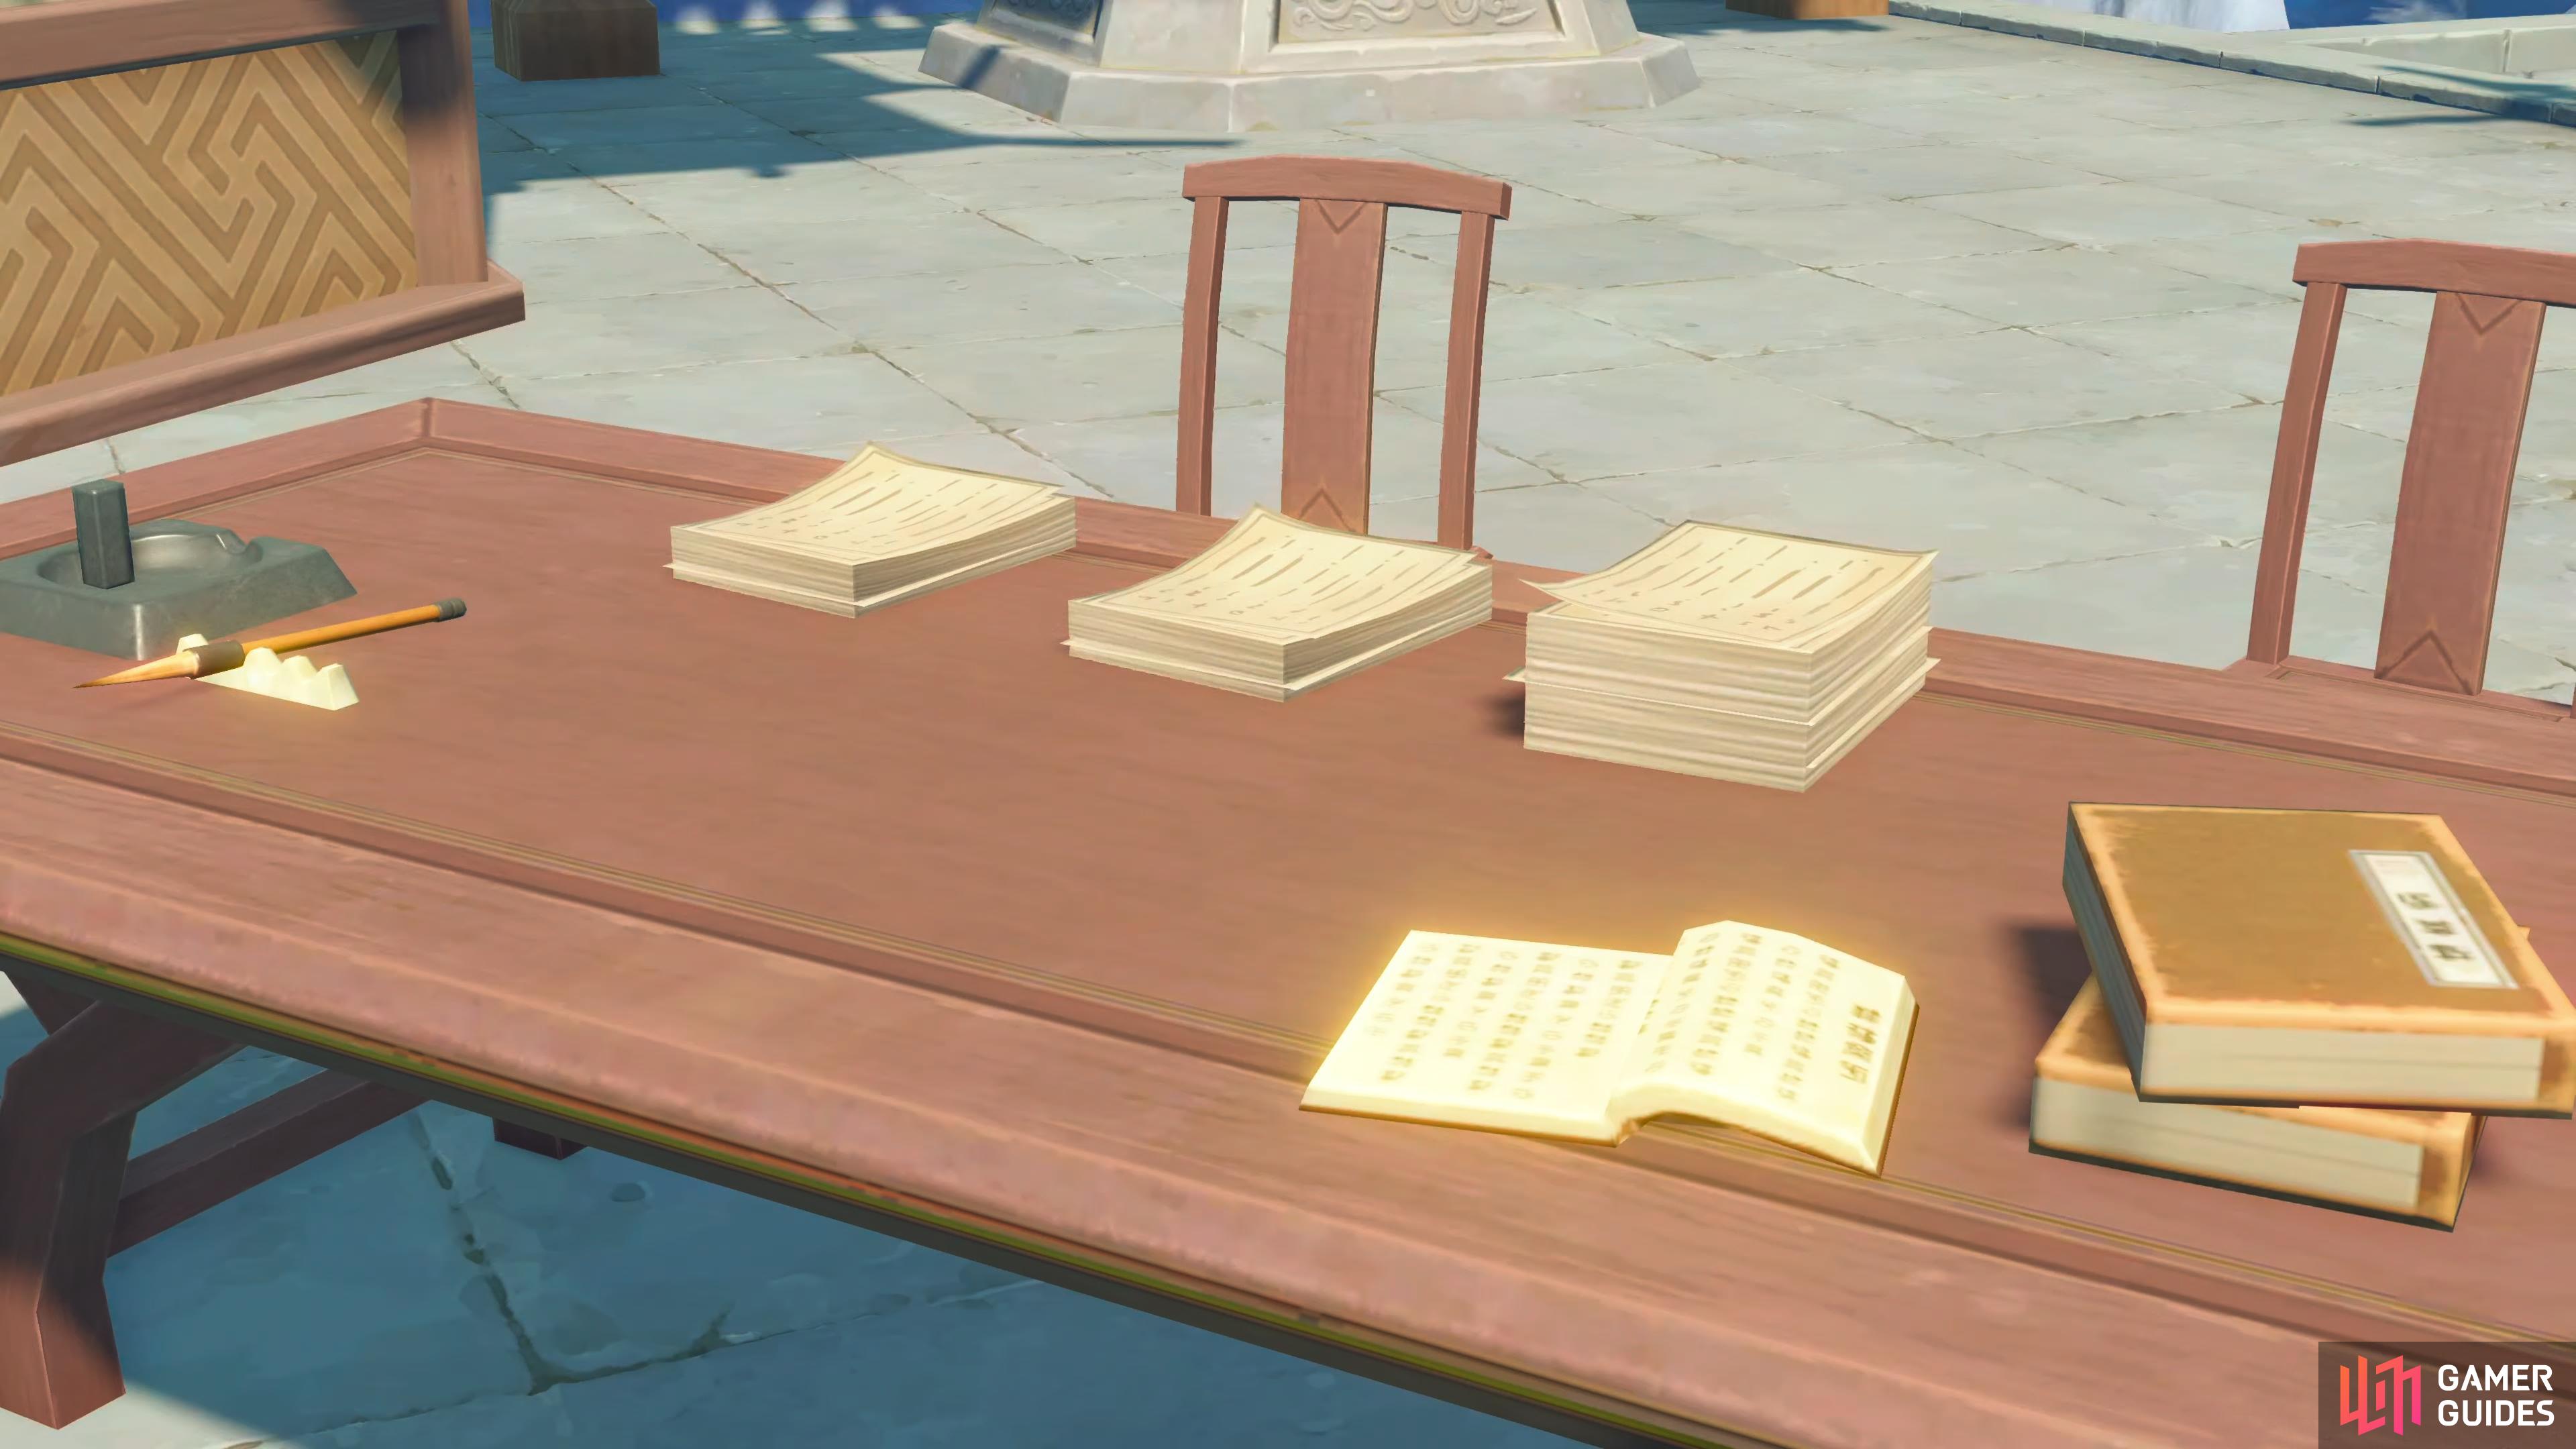 Read the manifestos on the table, the larger pile is Zhiyis, seems hes put a lot of work in to this.